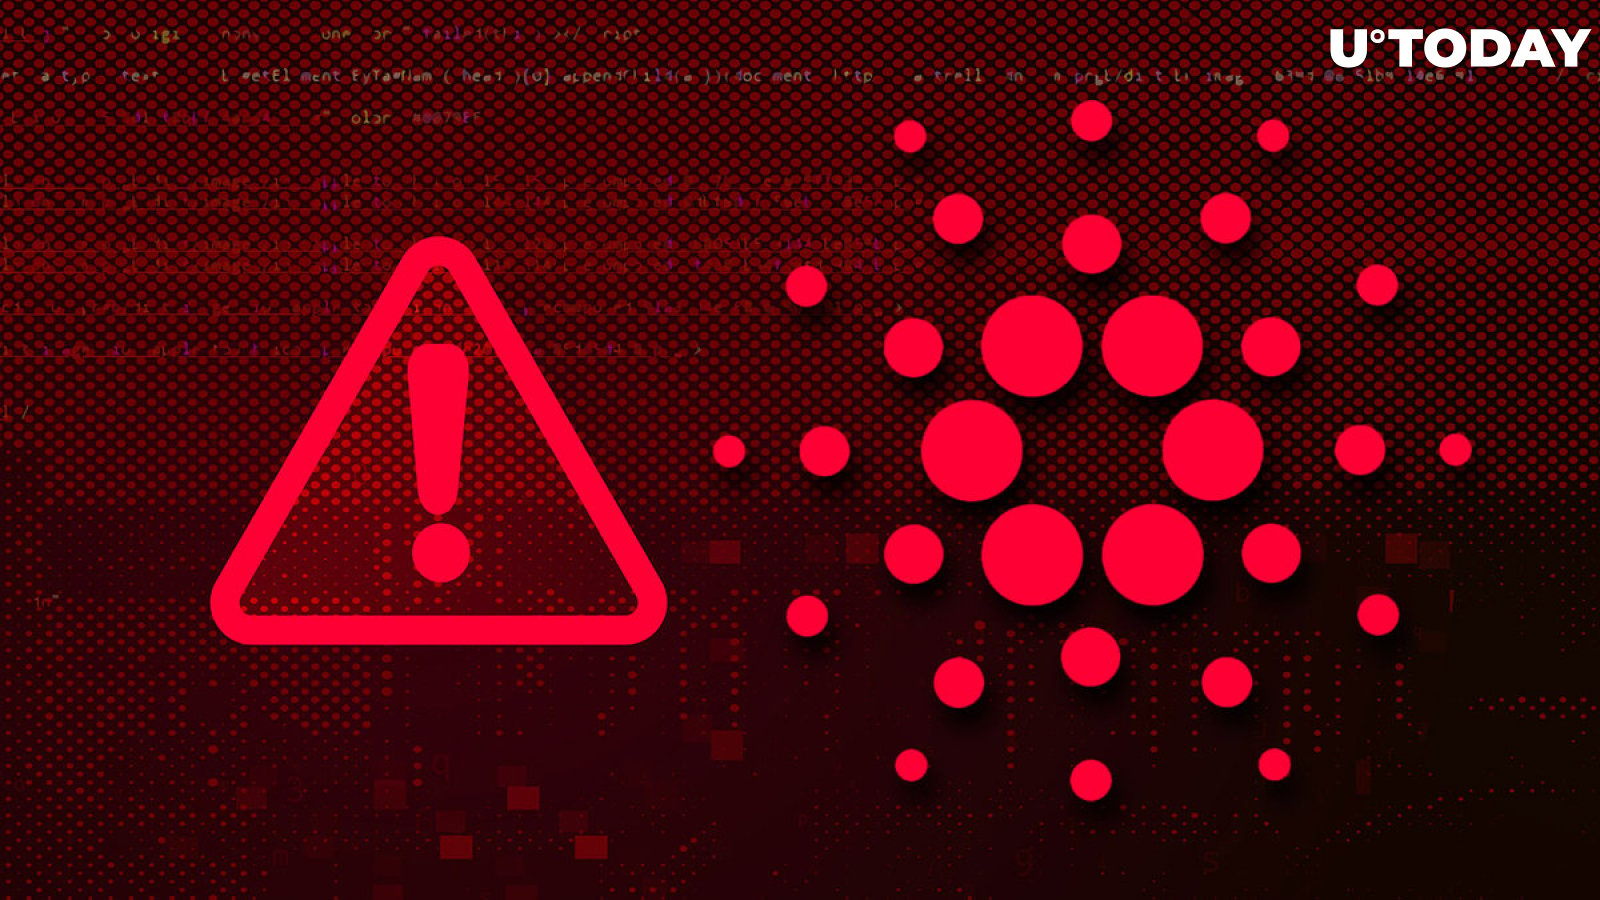 Cardano Scam Alert: Impersonators Use Privacy Token Midnight's Fake Site to Drain Wallets